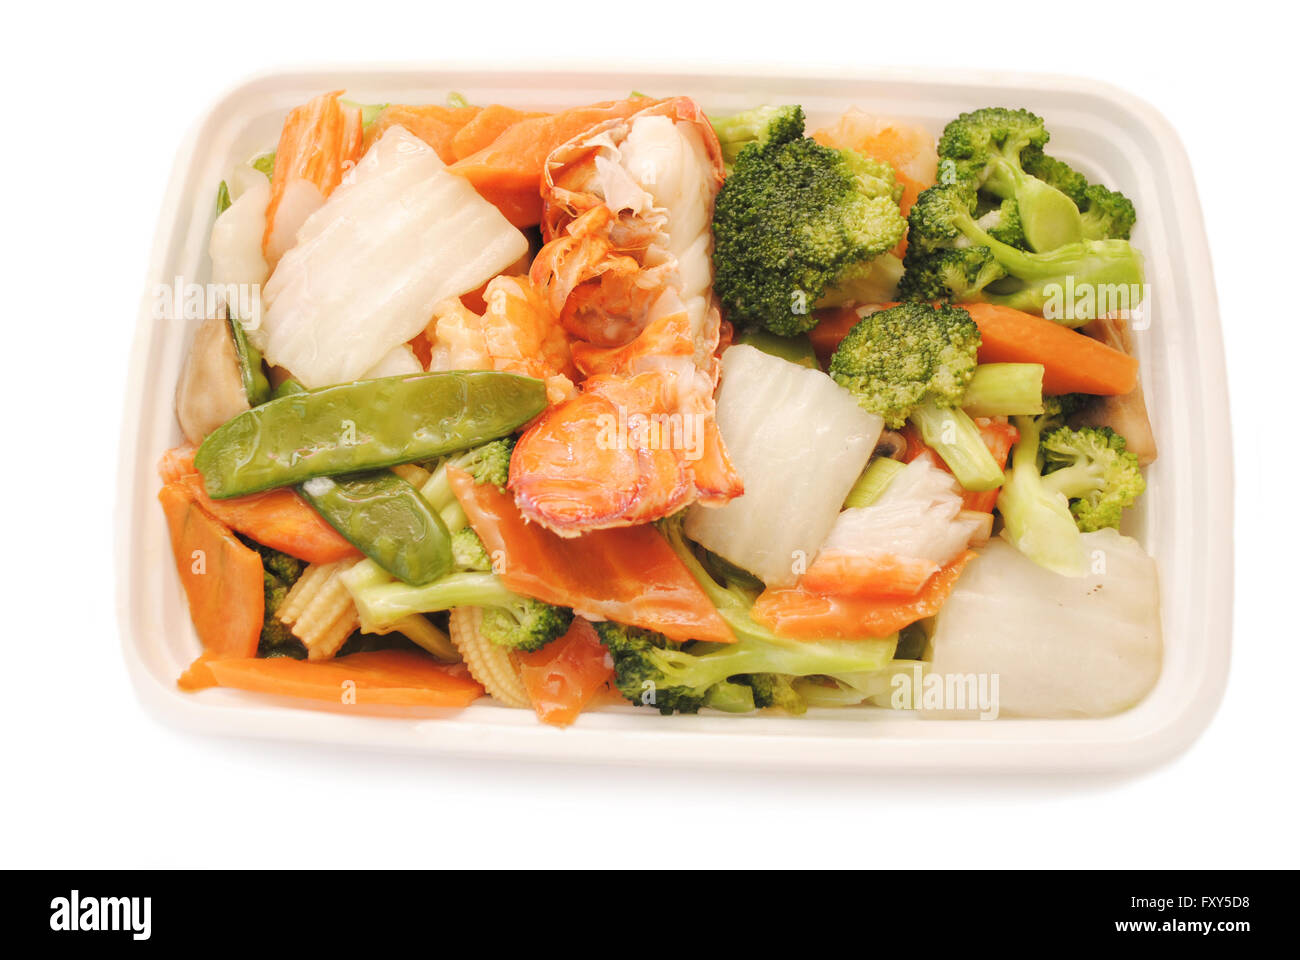 Chinese Takeout (American) - Seafood with Vegetables Stock Photo